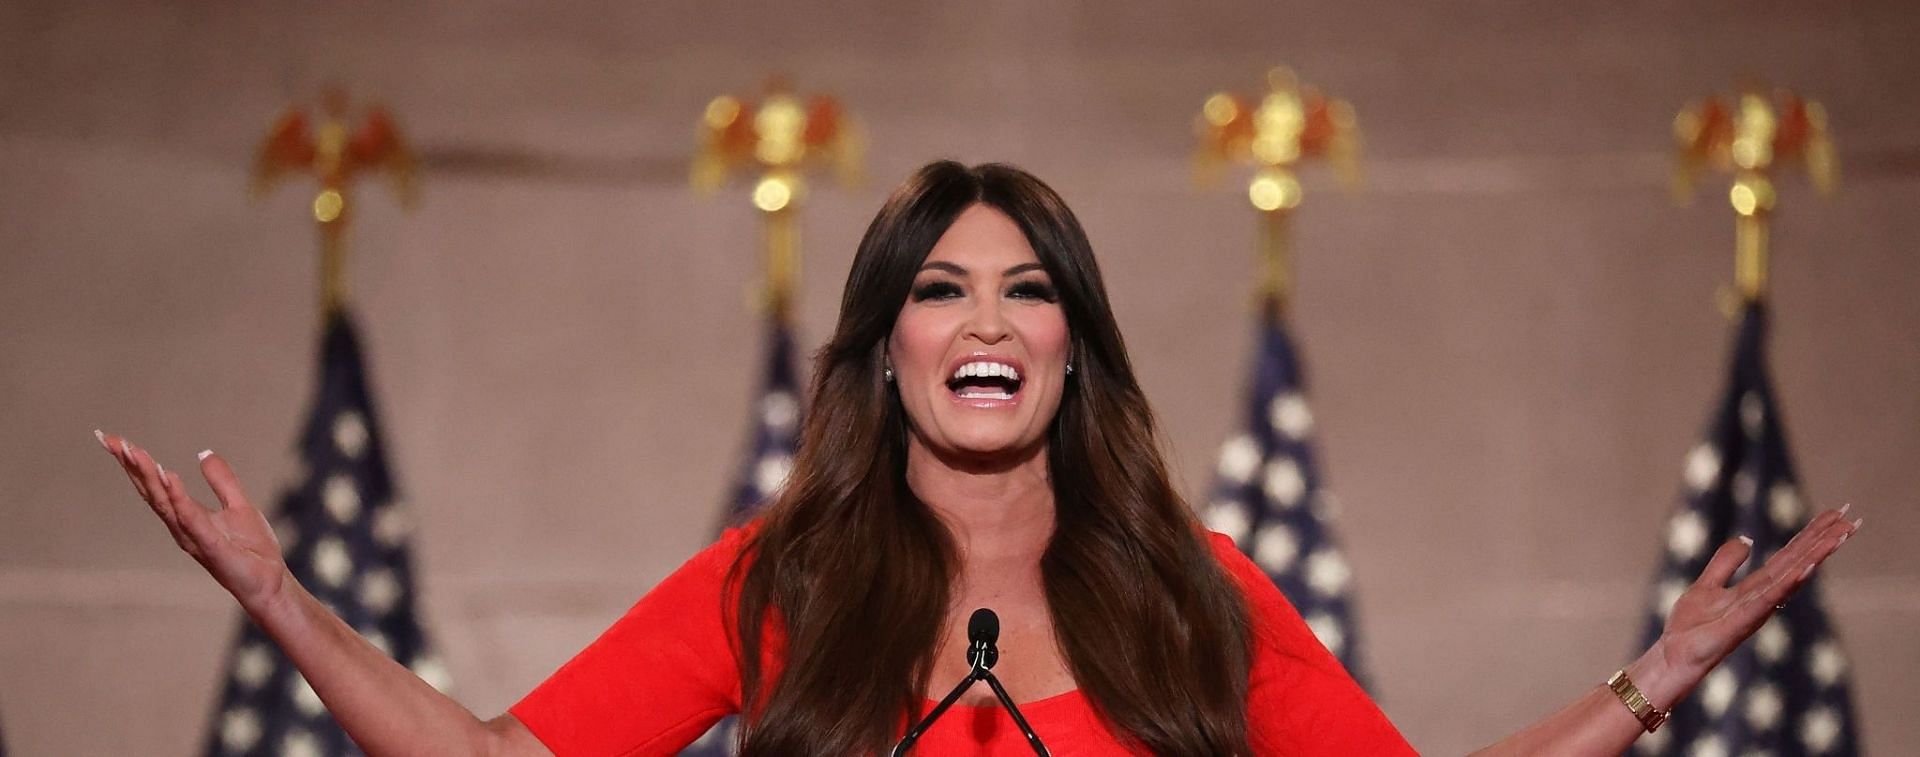 Kimberly Guilfoyle is a media personality and advisor to former US president Donald Trump (Image via Chip Somodevilla/Getty Images)